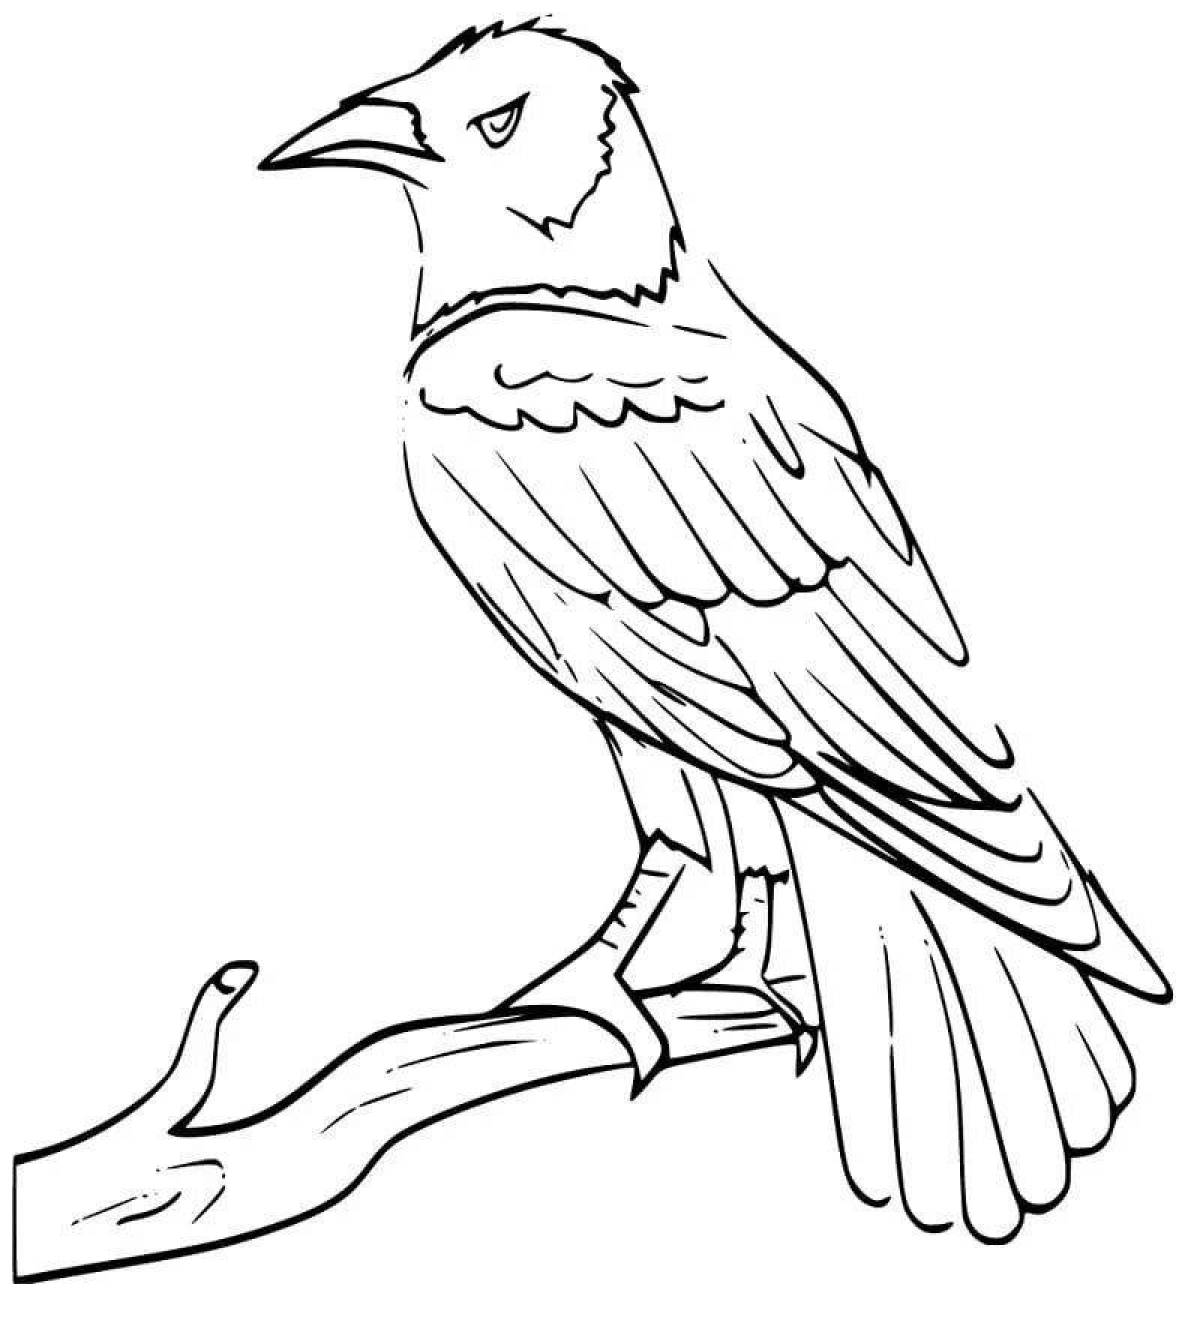 Coloring book happy crow for kids